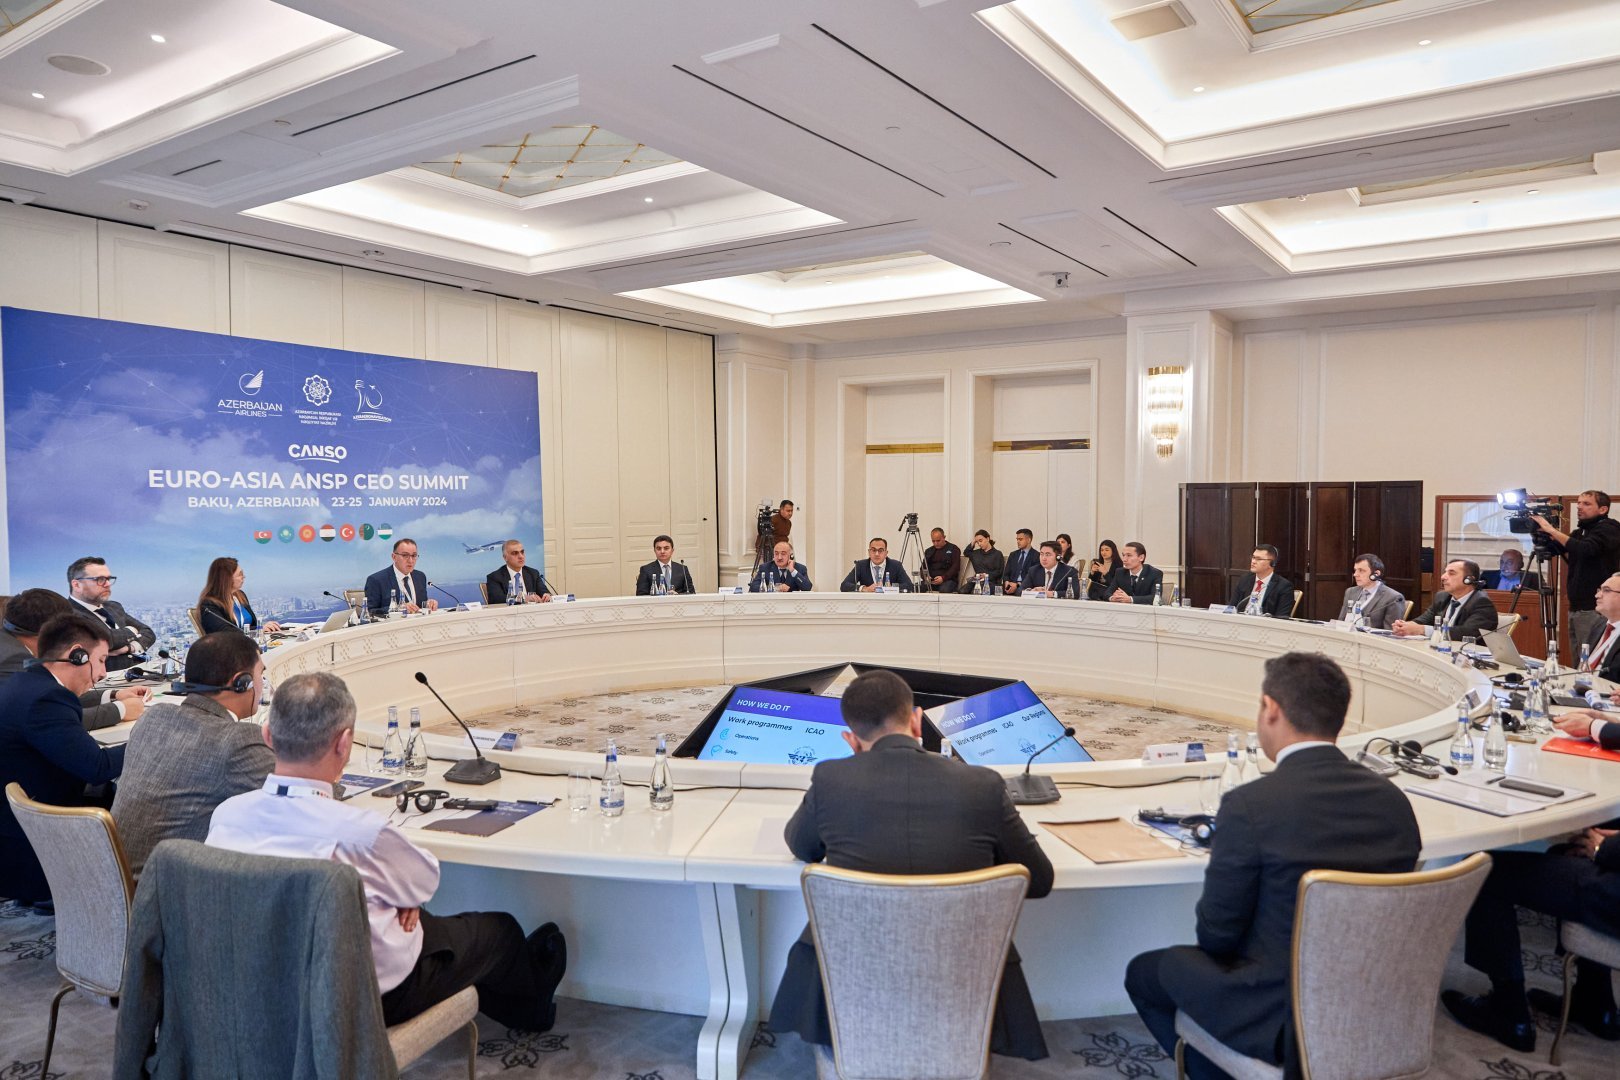 Baku hosts first CANSO Summit of Air Navigation Providers from Azerbaijan, Türkiye, and Central Asian countries